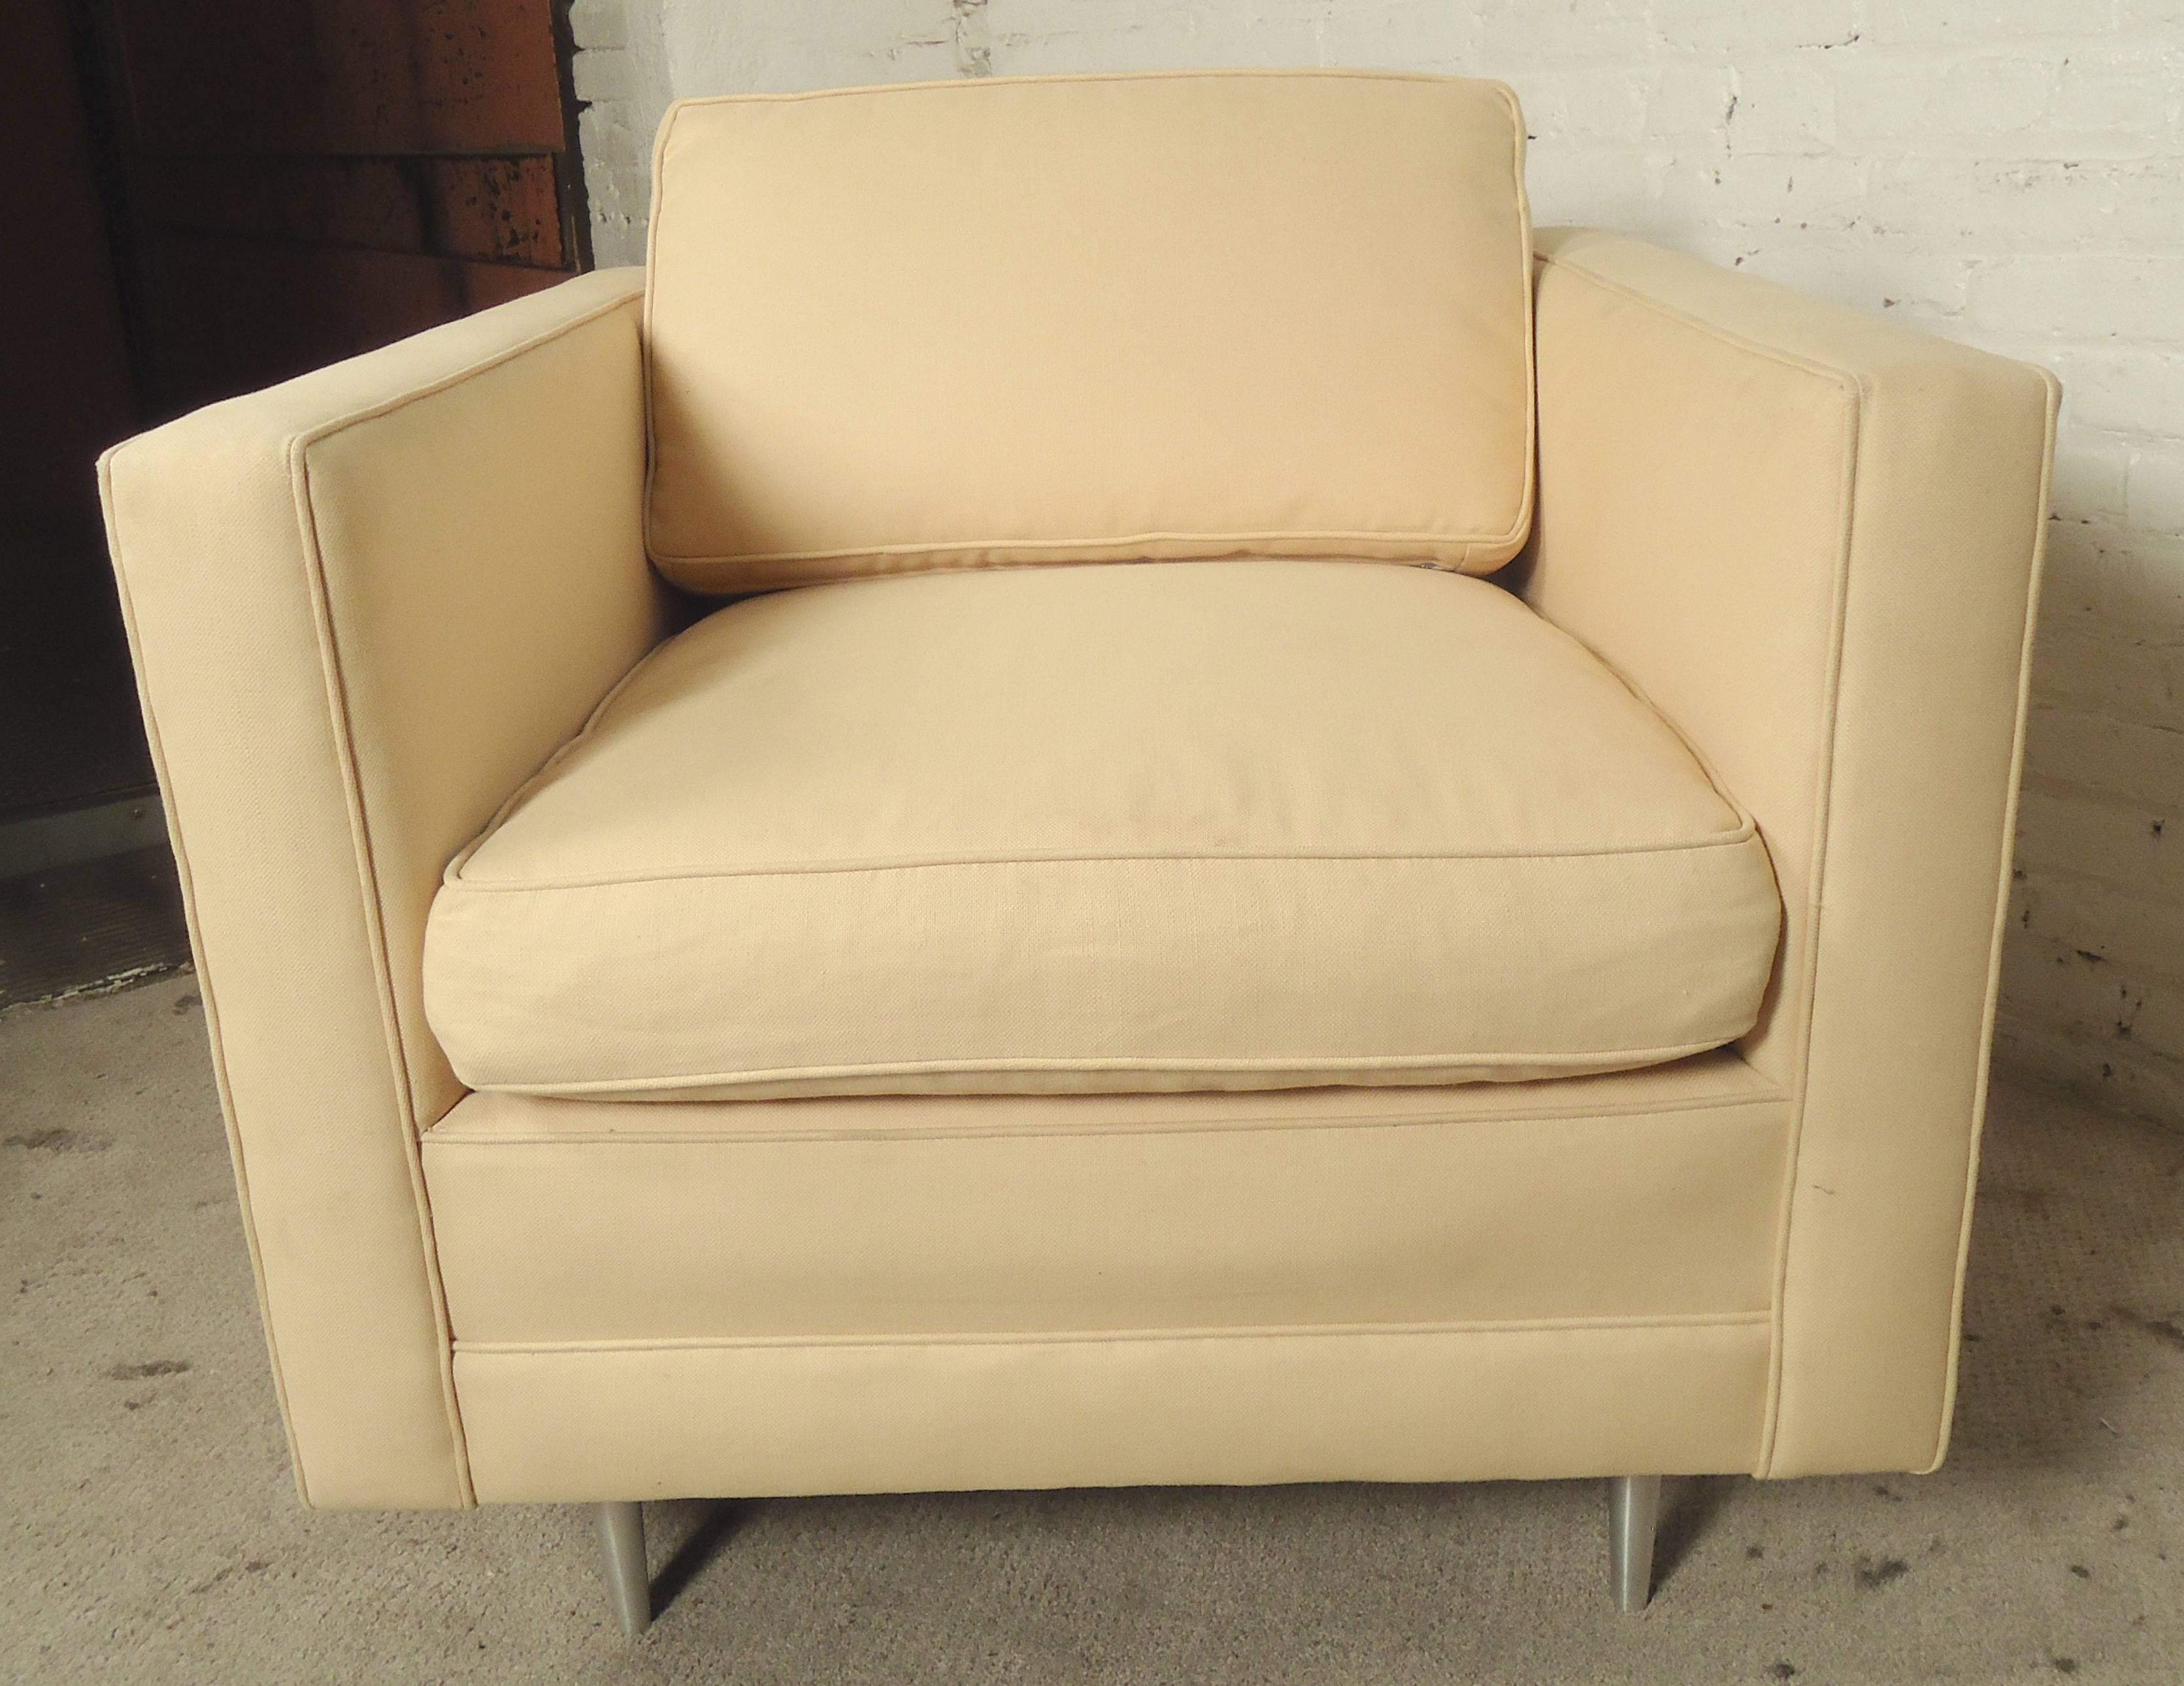 Square lounge chair with high arms and chrome feet. Large soft cushioning, beige upholstery.

(Please confirm item location - NY or NJ - with dealer)
